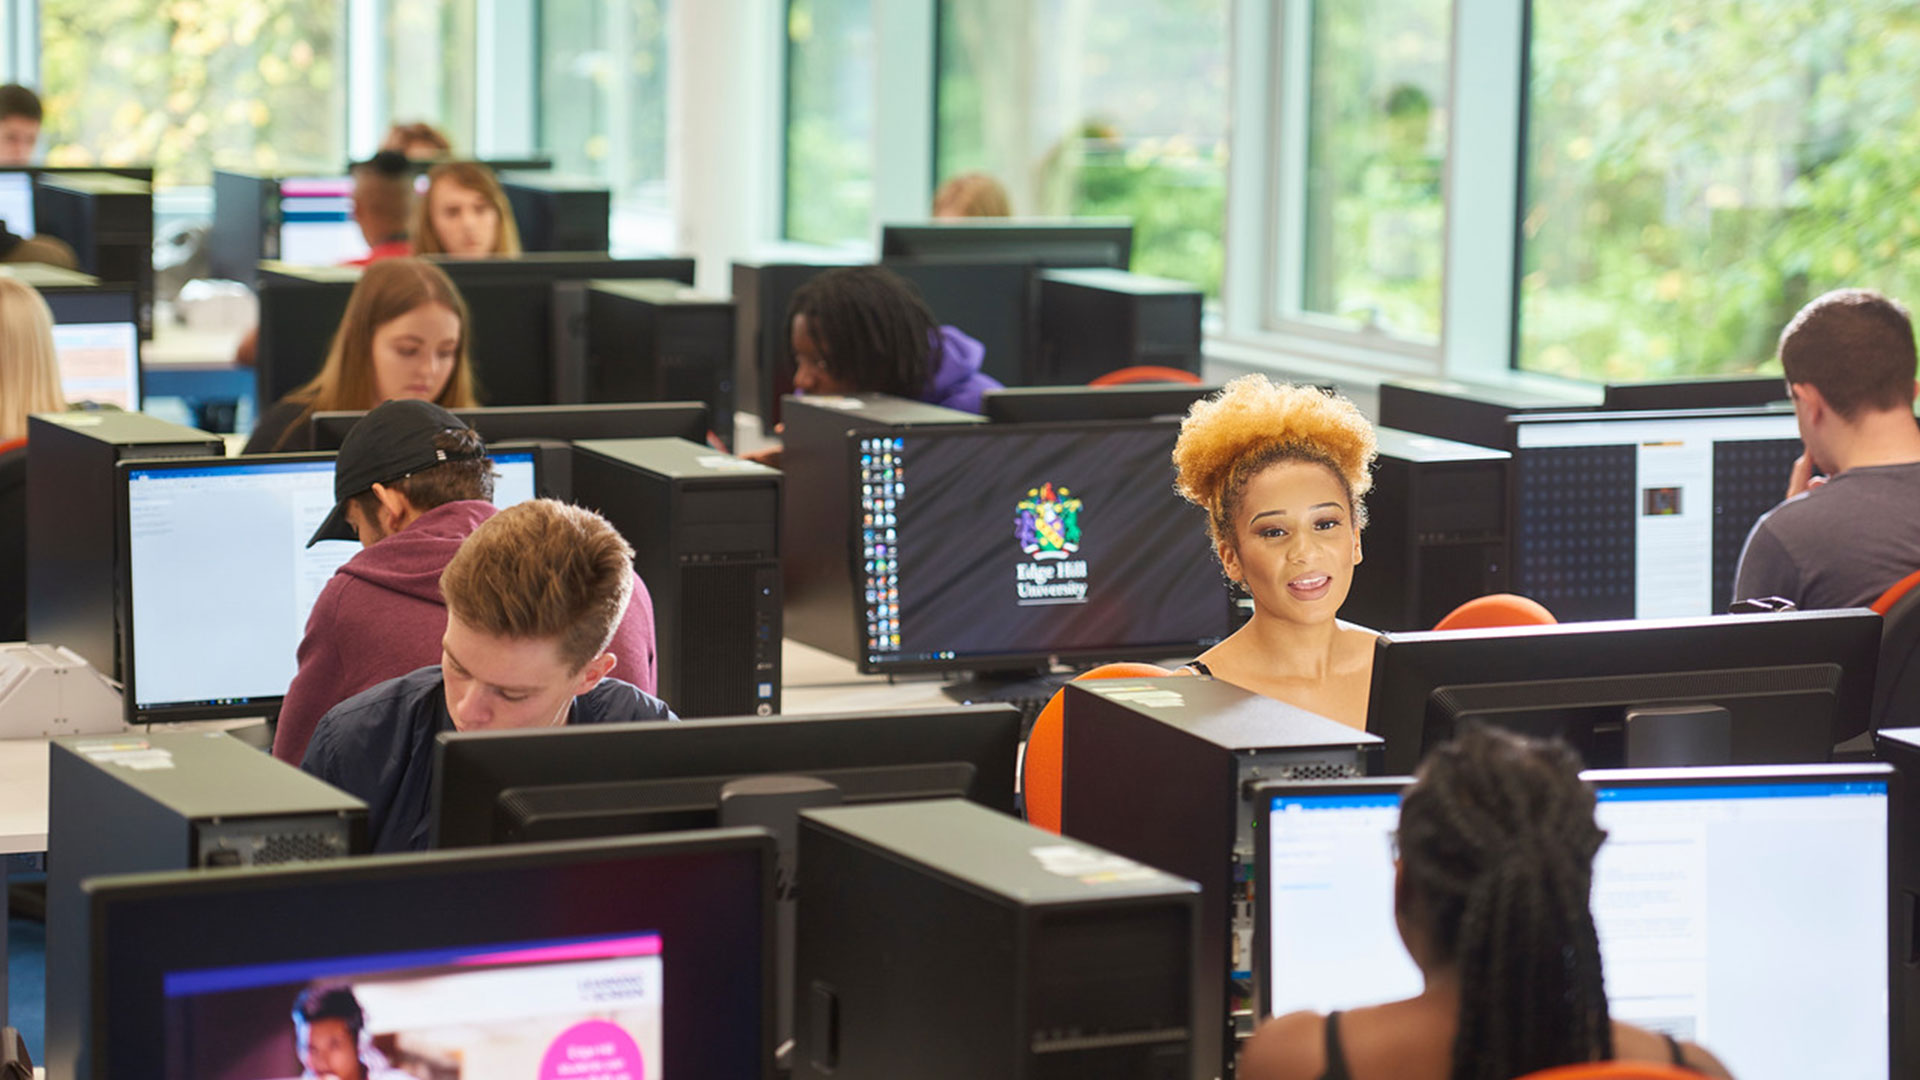 Students in a computer classroom. Each student is at their own computer and one student is talking to another across the desk.